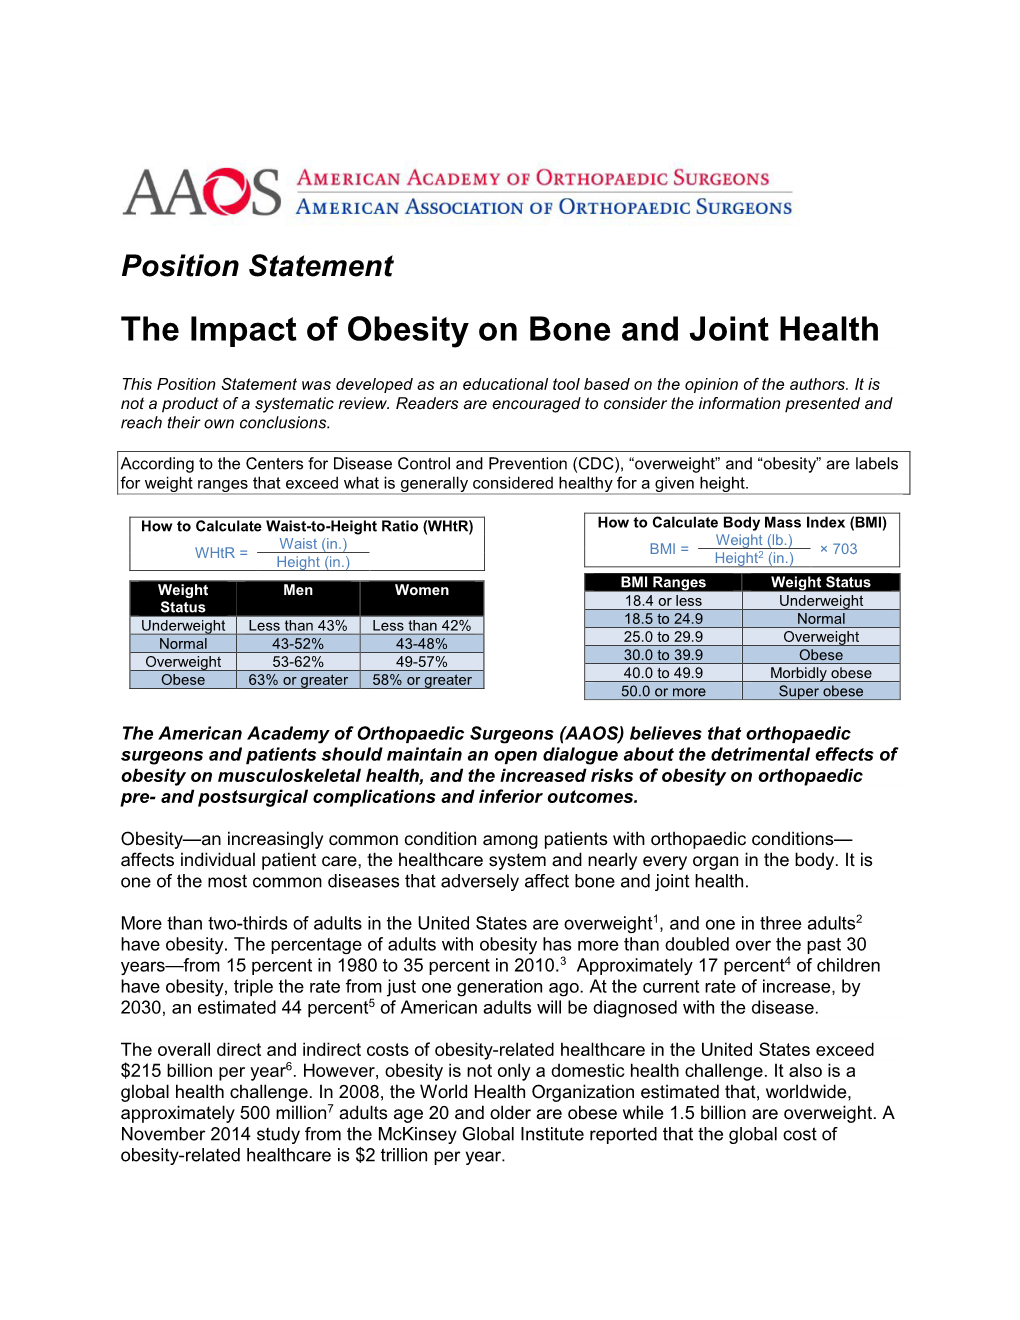 The Impact of Obesity on Bone and Joint Health